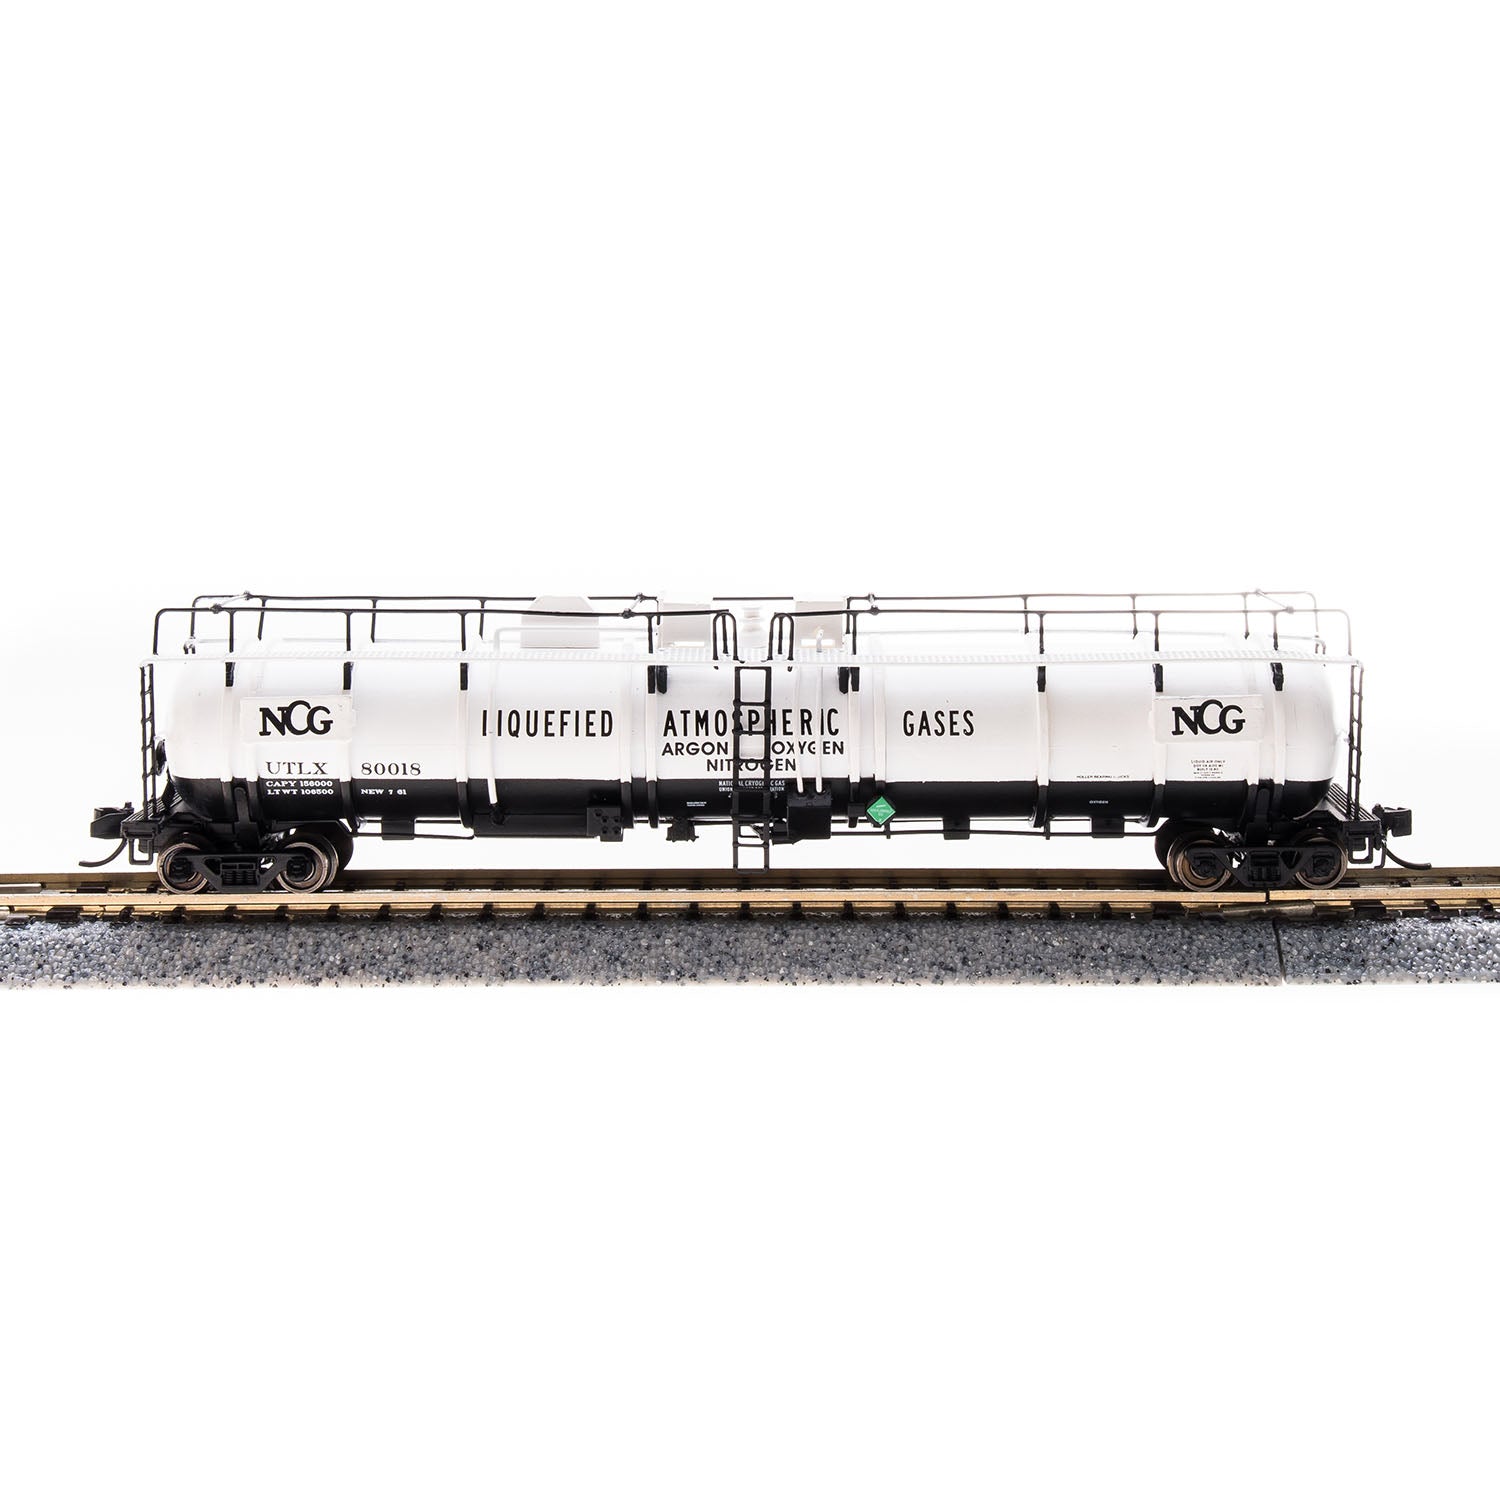 BROADWAY LIMITED　Air Products Tank Car 3830